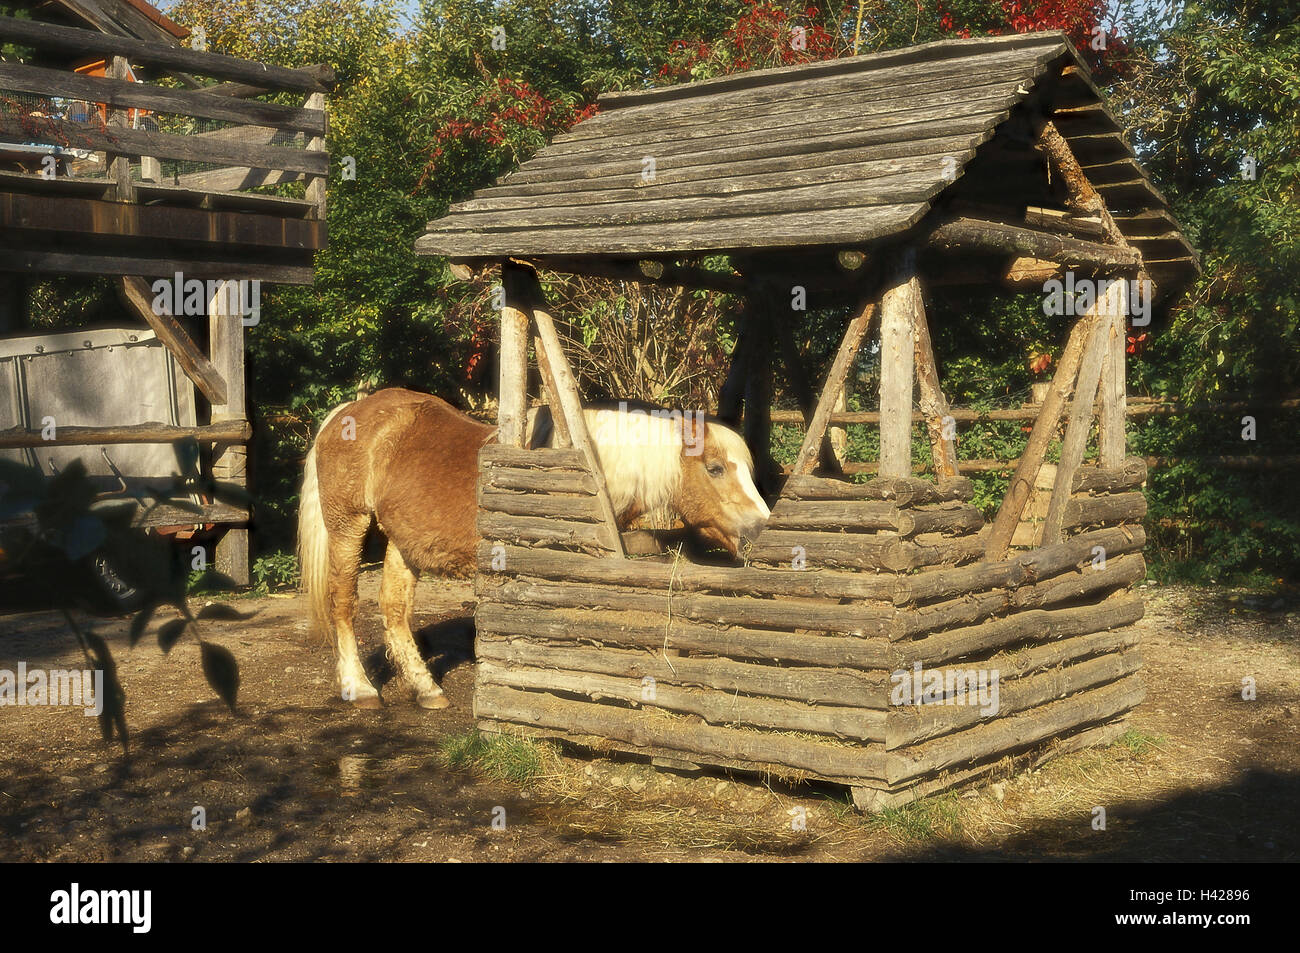 Farm, Haflinger, hayrack, eat,    Paddock, Paddock, horse, horse race, Futterraufe, hay, eating, animal husbandry, appropriate to the species, agriculture, rural, Stock Photo